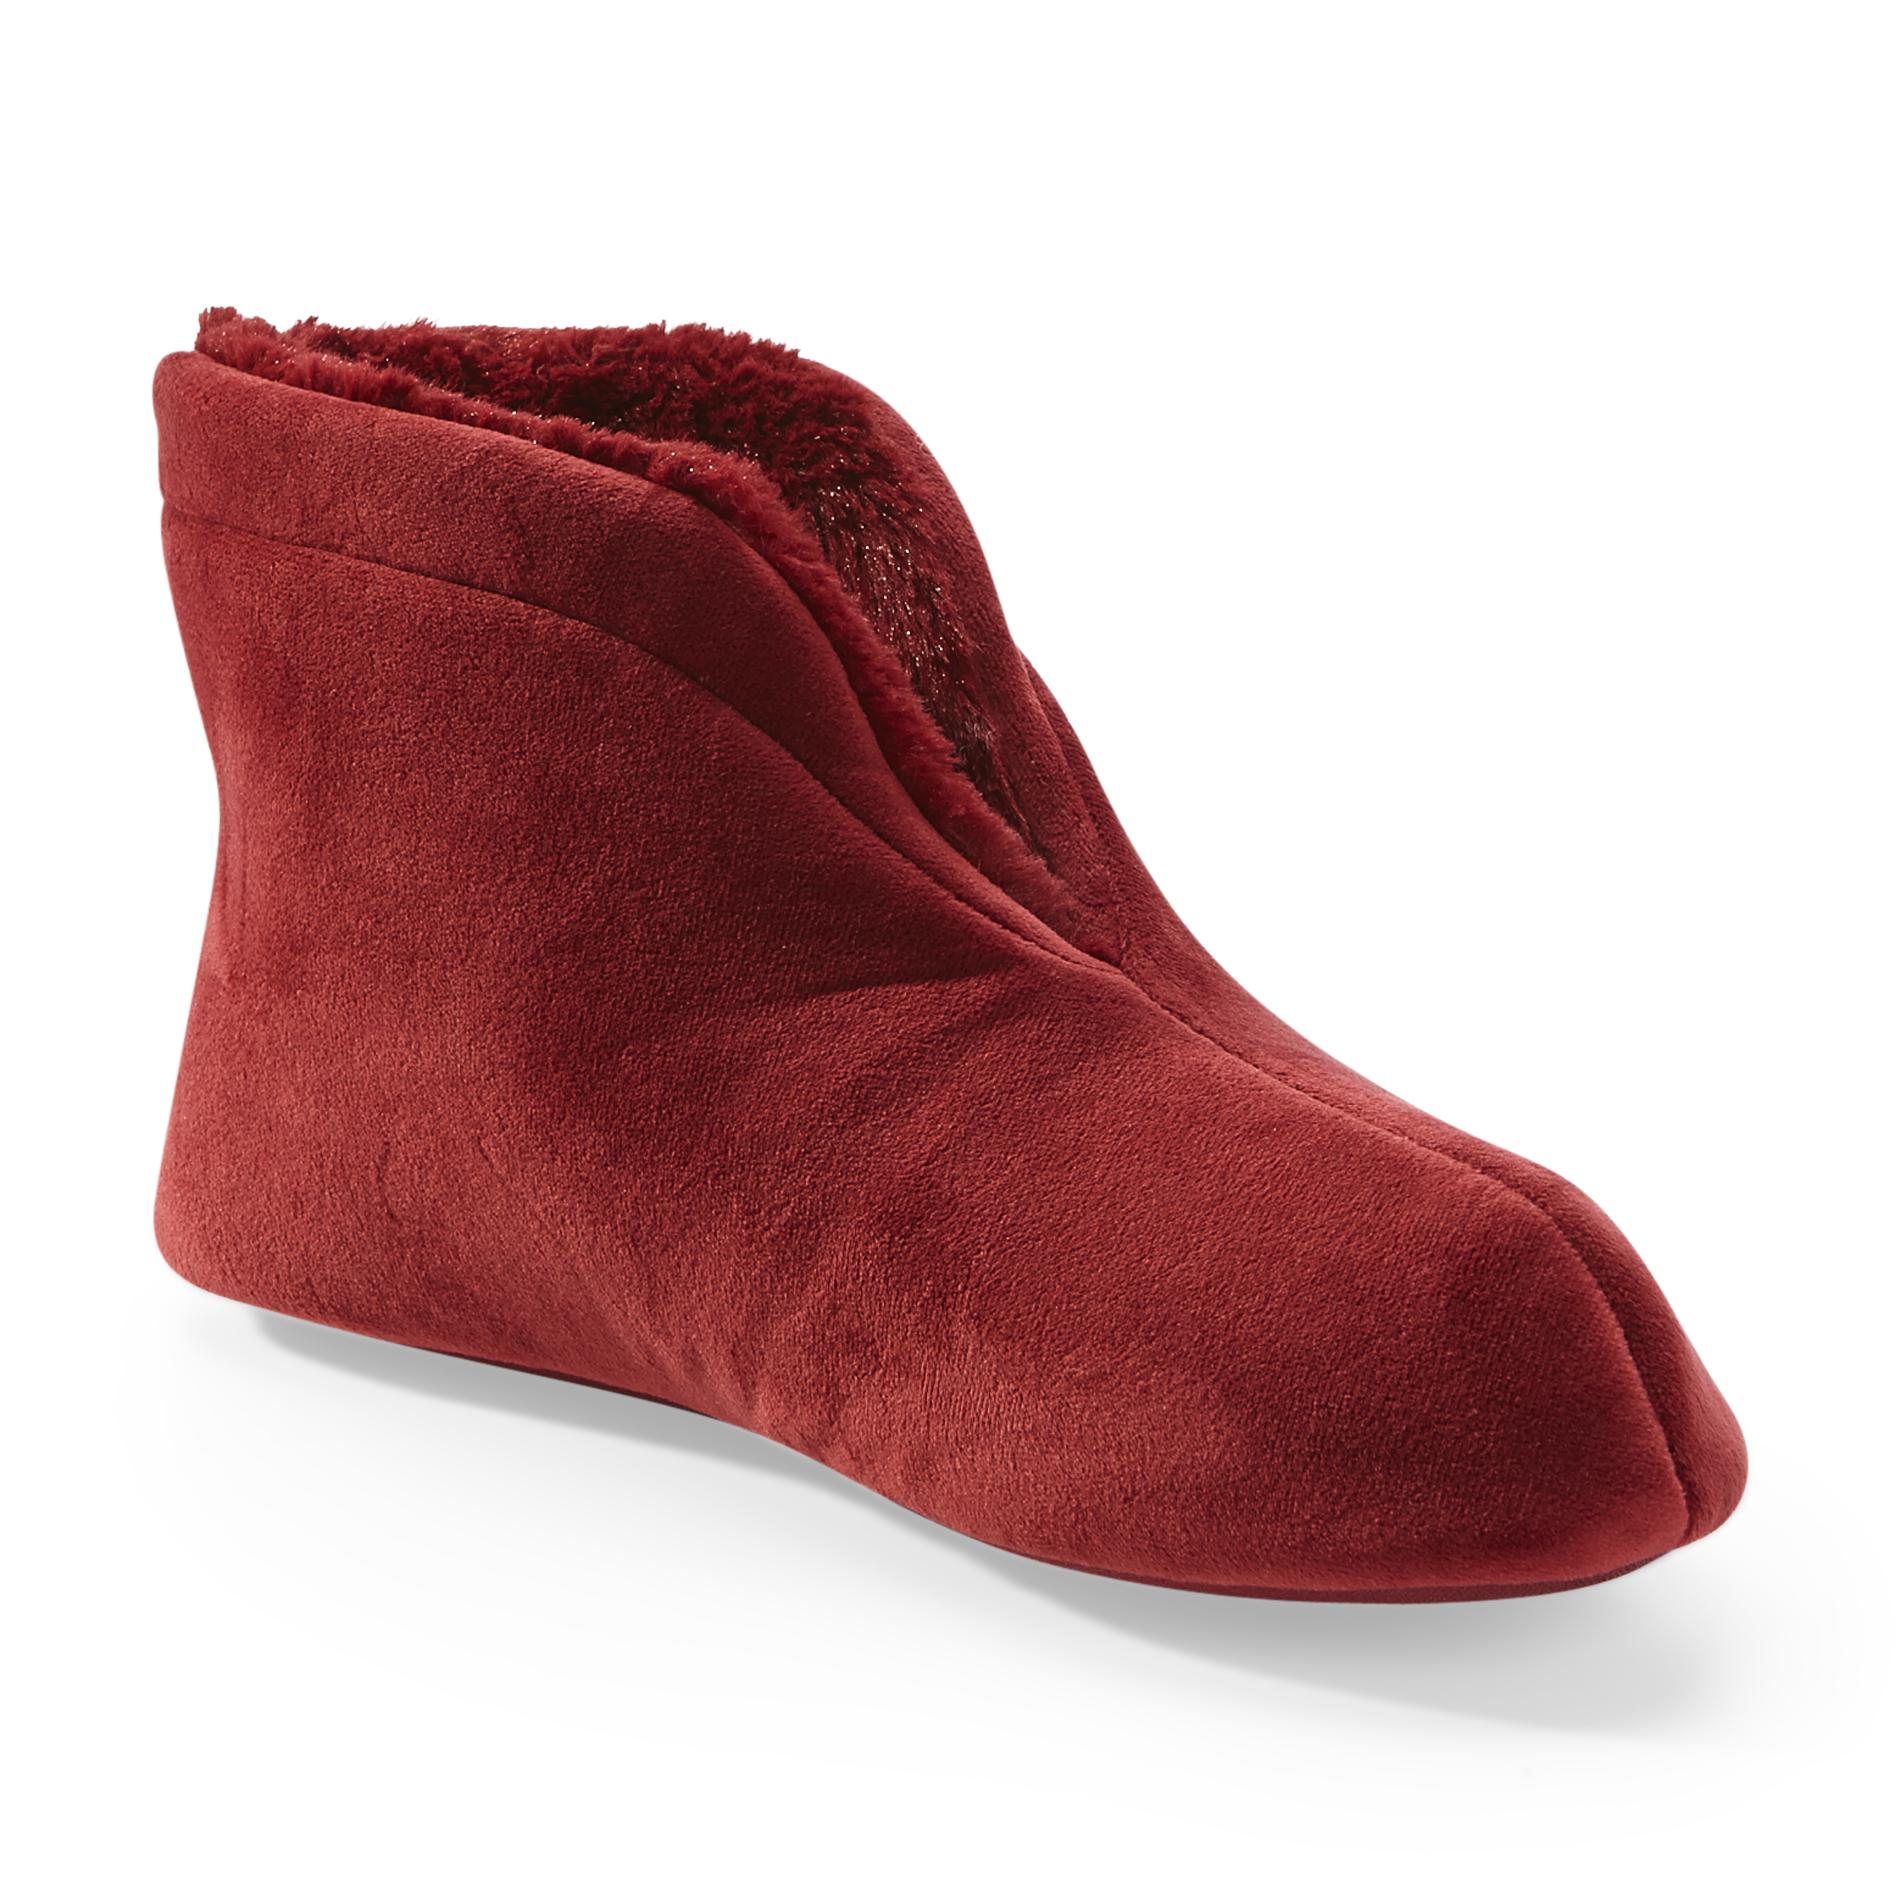 Plush Bootie Slippers For Women | Division of Global Affairs